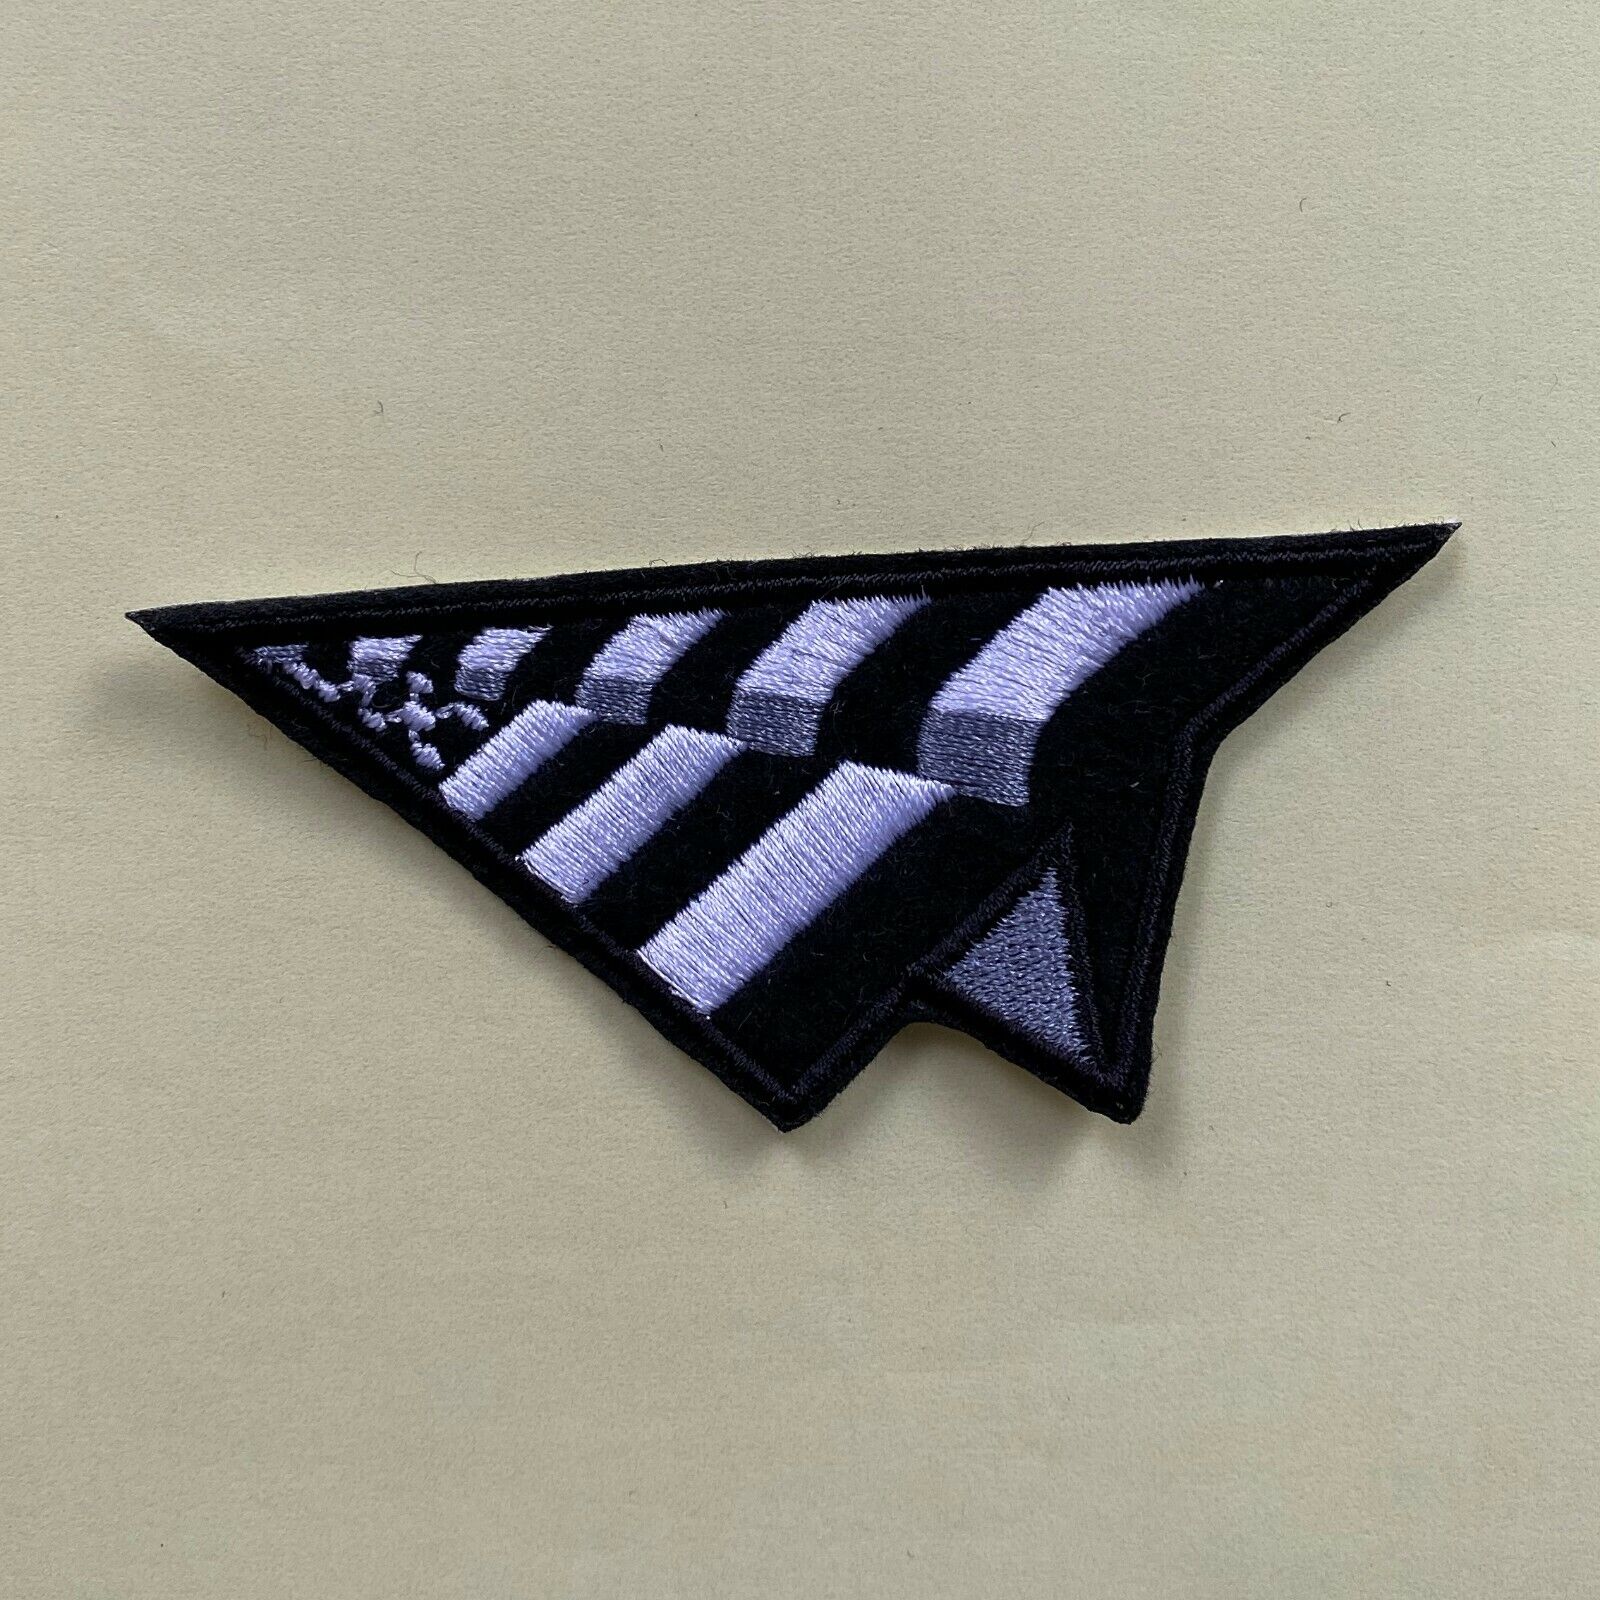 Iron on Patch - Roc Nation Jay Z Kite Embroidered Patch